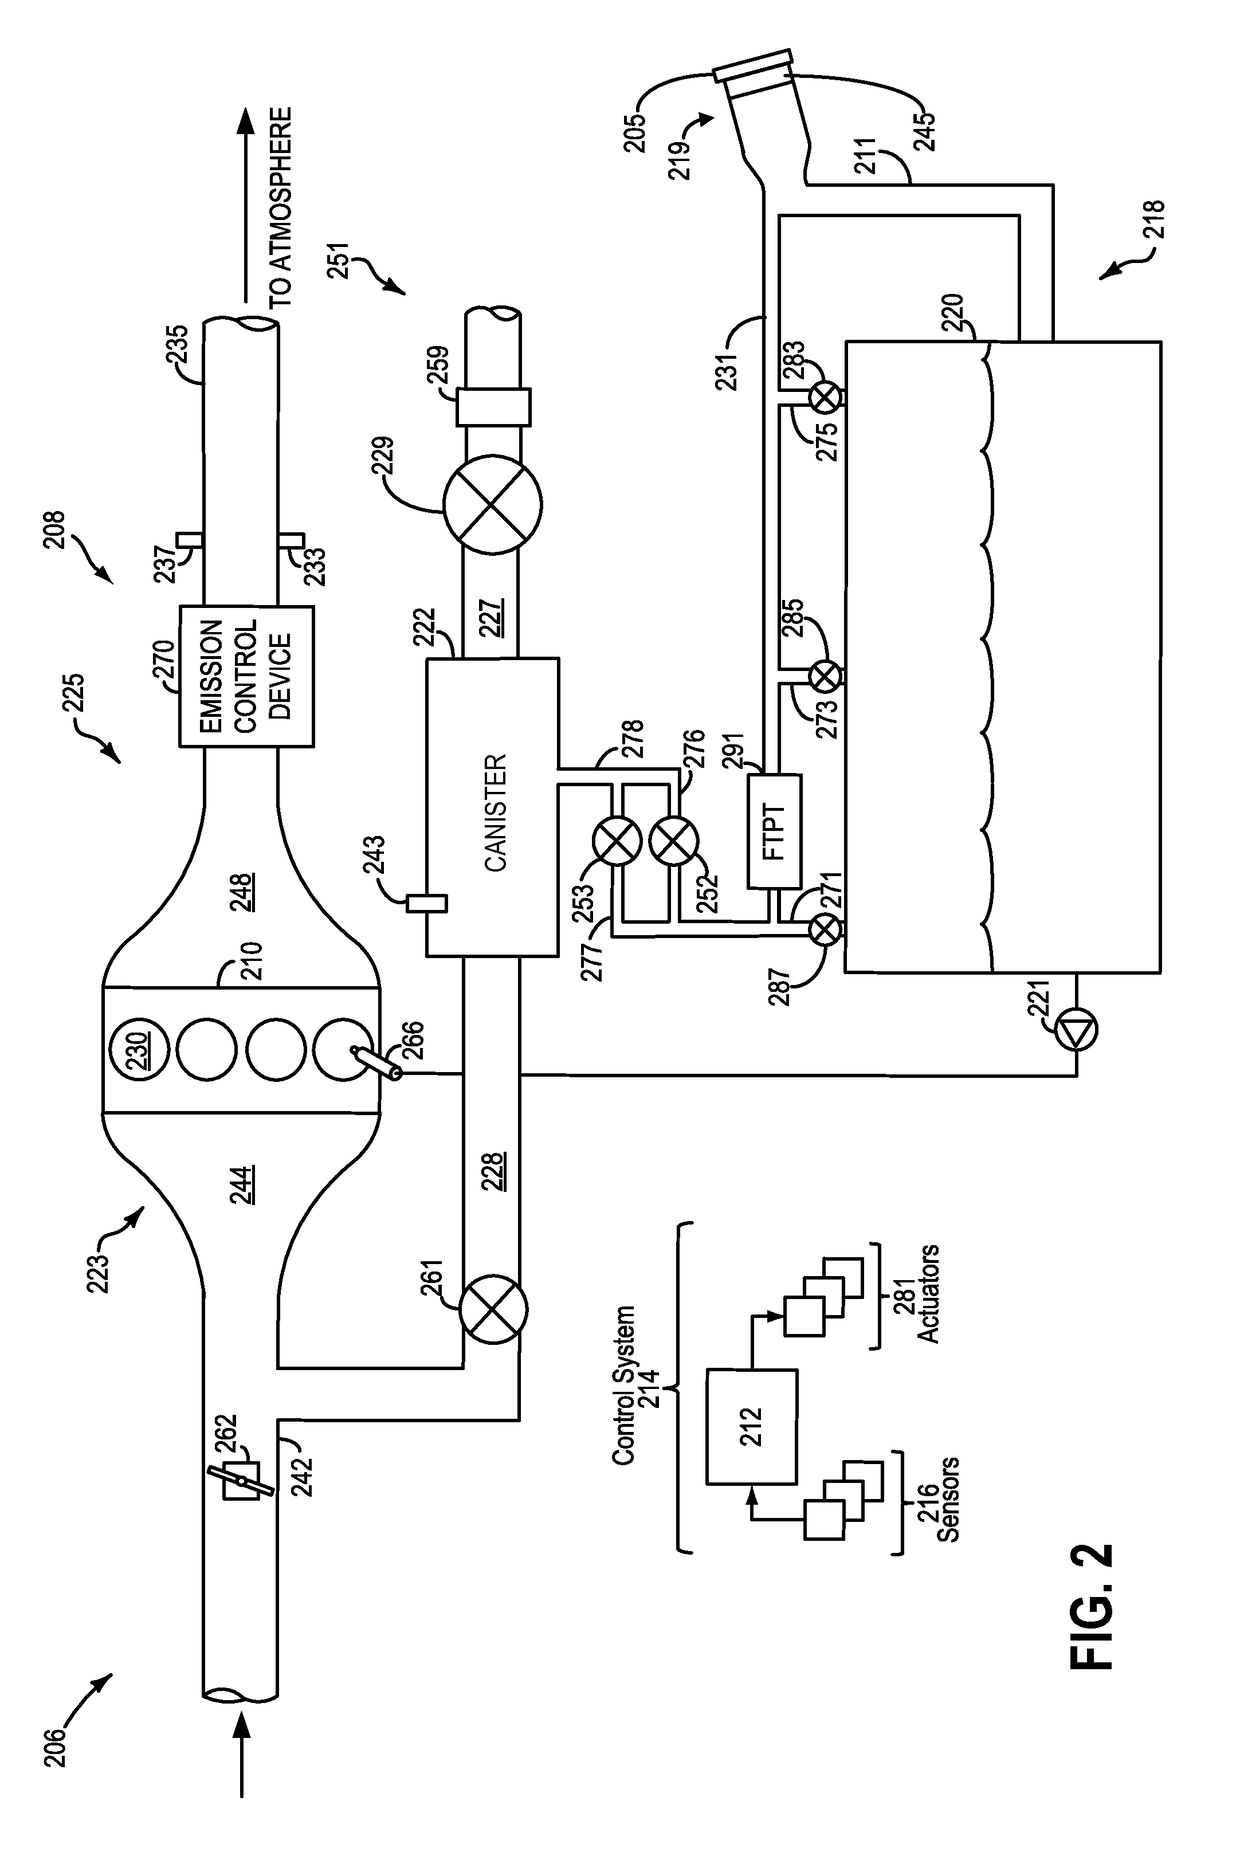 Systems and methods for depressurizing a fuel tank